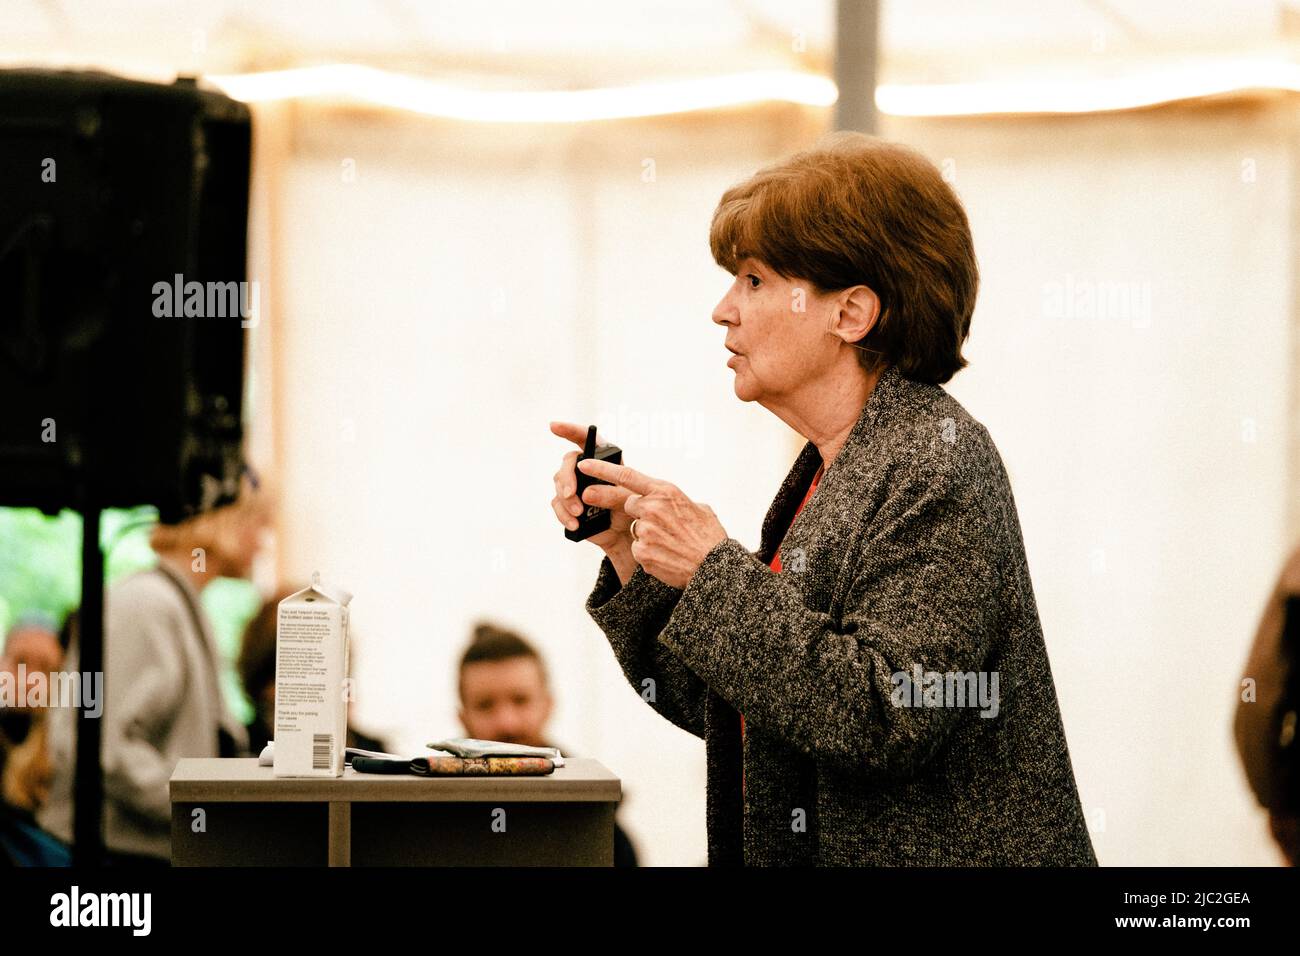 Copenhagen, Denmark. 29th, May 2022. The American oceanographer, marine biologist and author Edith Widder seen at a talk during the Danish science festival Bloom Festival 2022 in Copenhagen. (Photo credit: Gonzales Photo - Malthe Ivarsson). Stock Photo